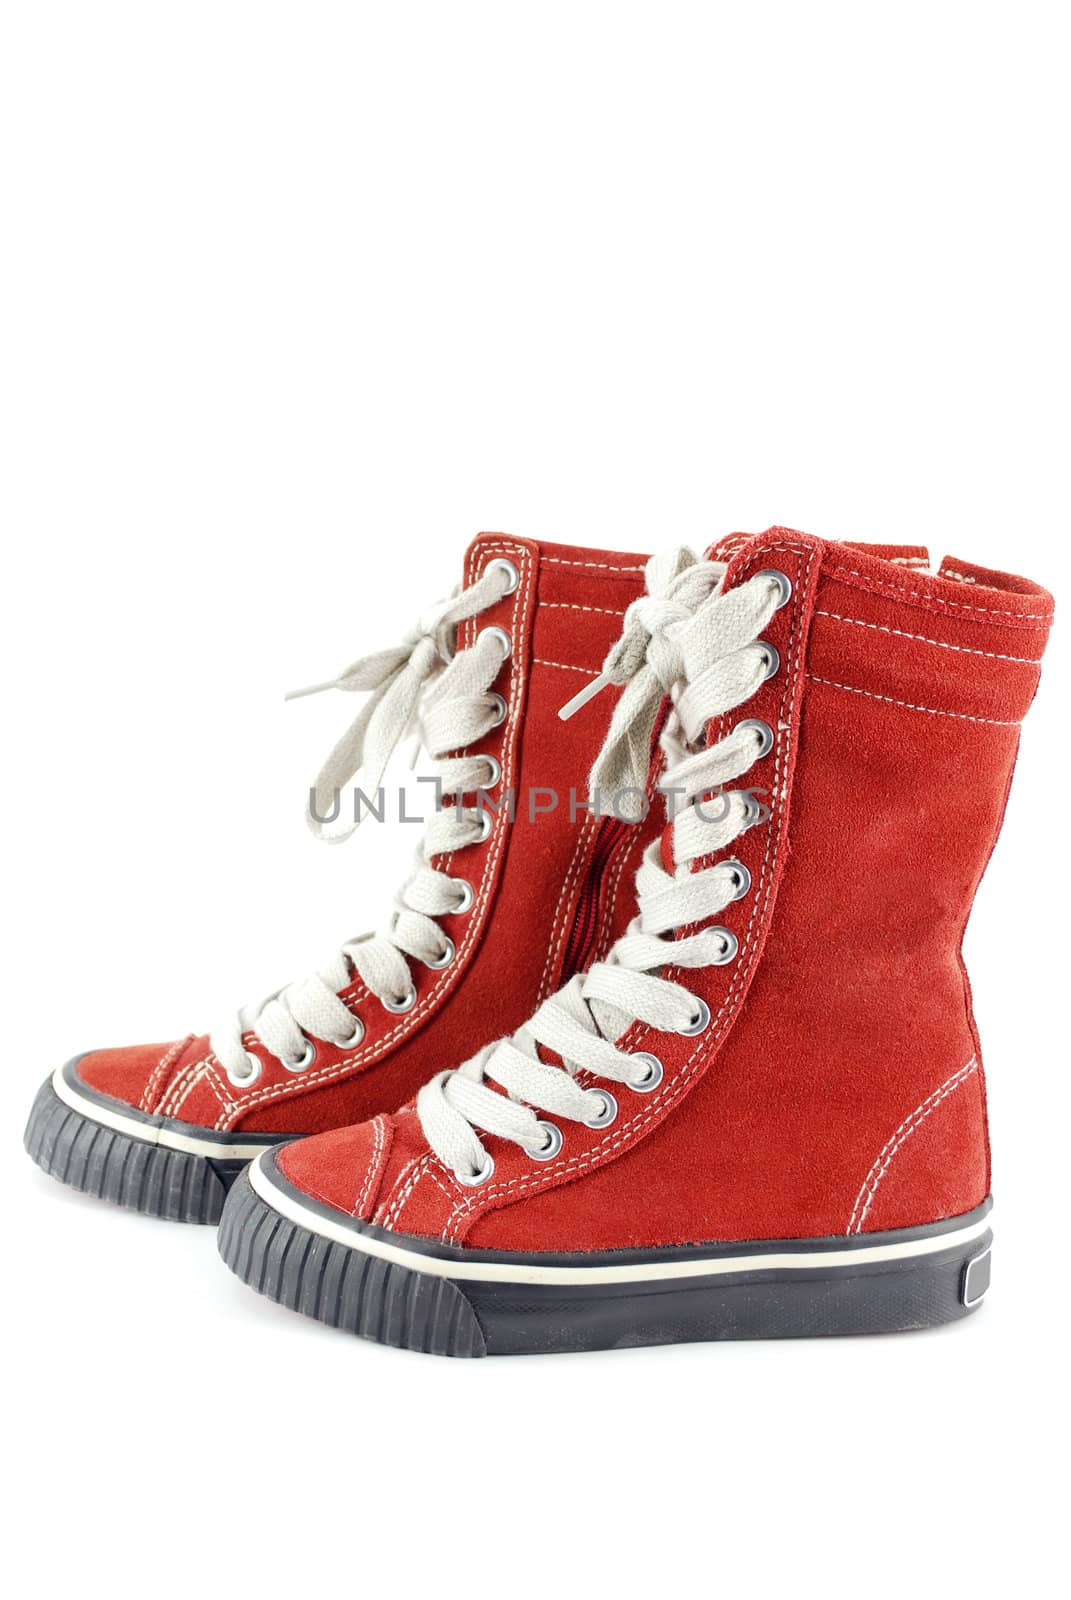 Child red sneakers on white